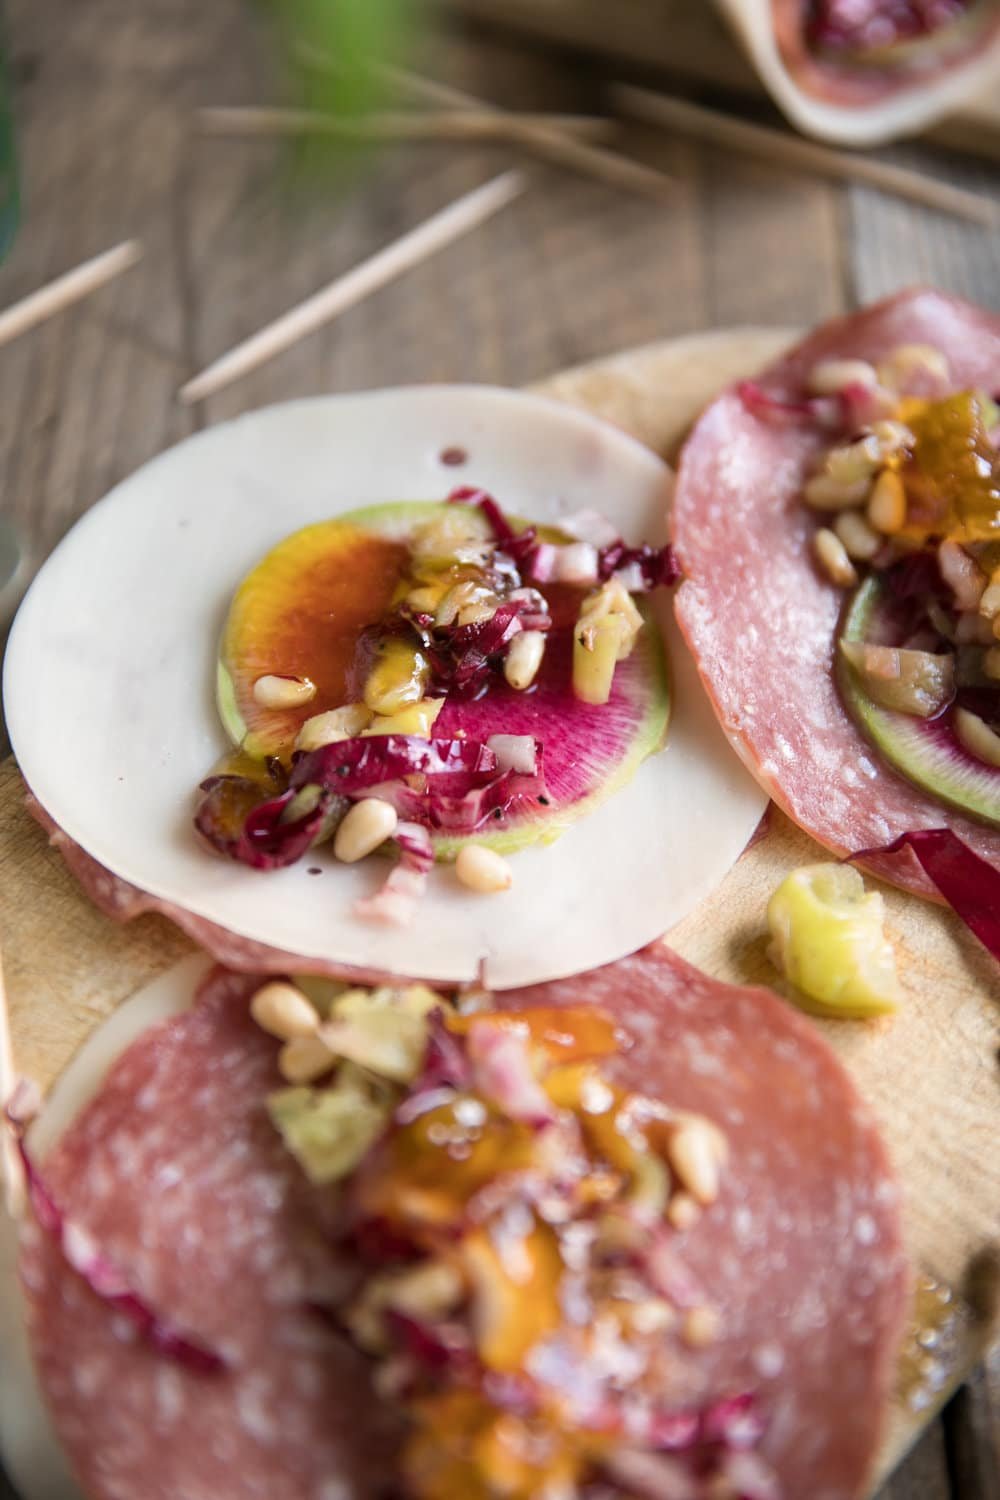 Ready in under 15 minutes, these Soppressata and Radish Provolone Cones make the perfect holiday snack or appetizer